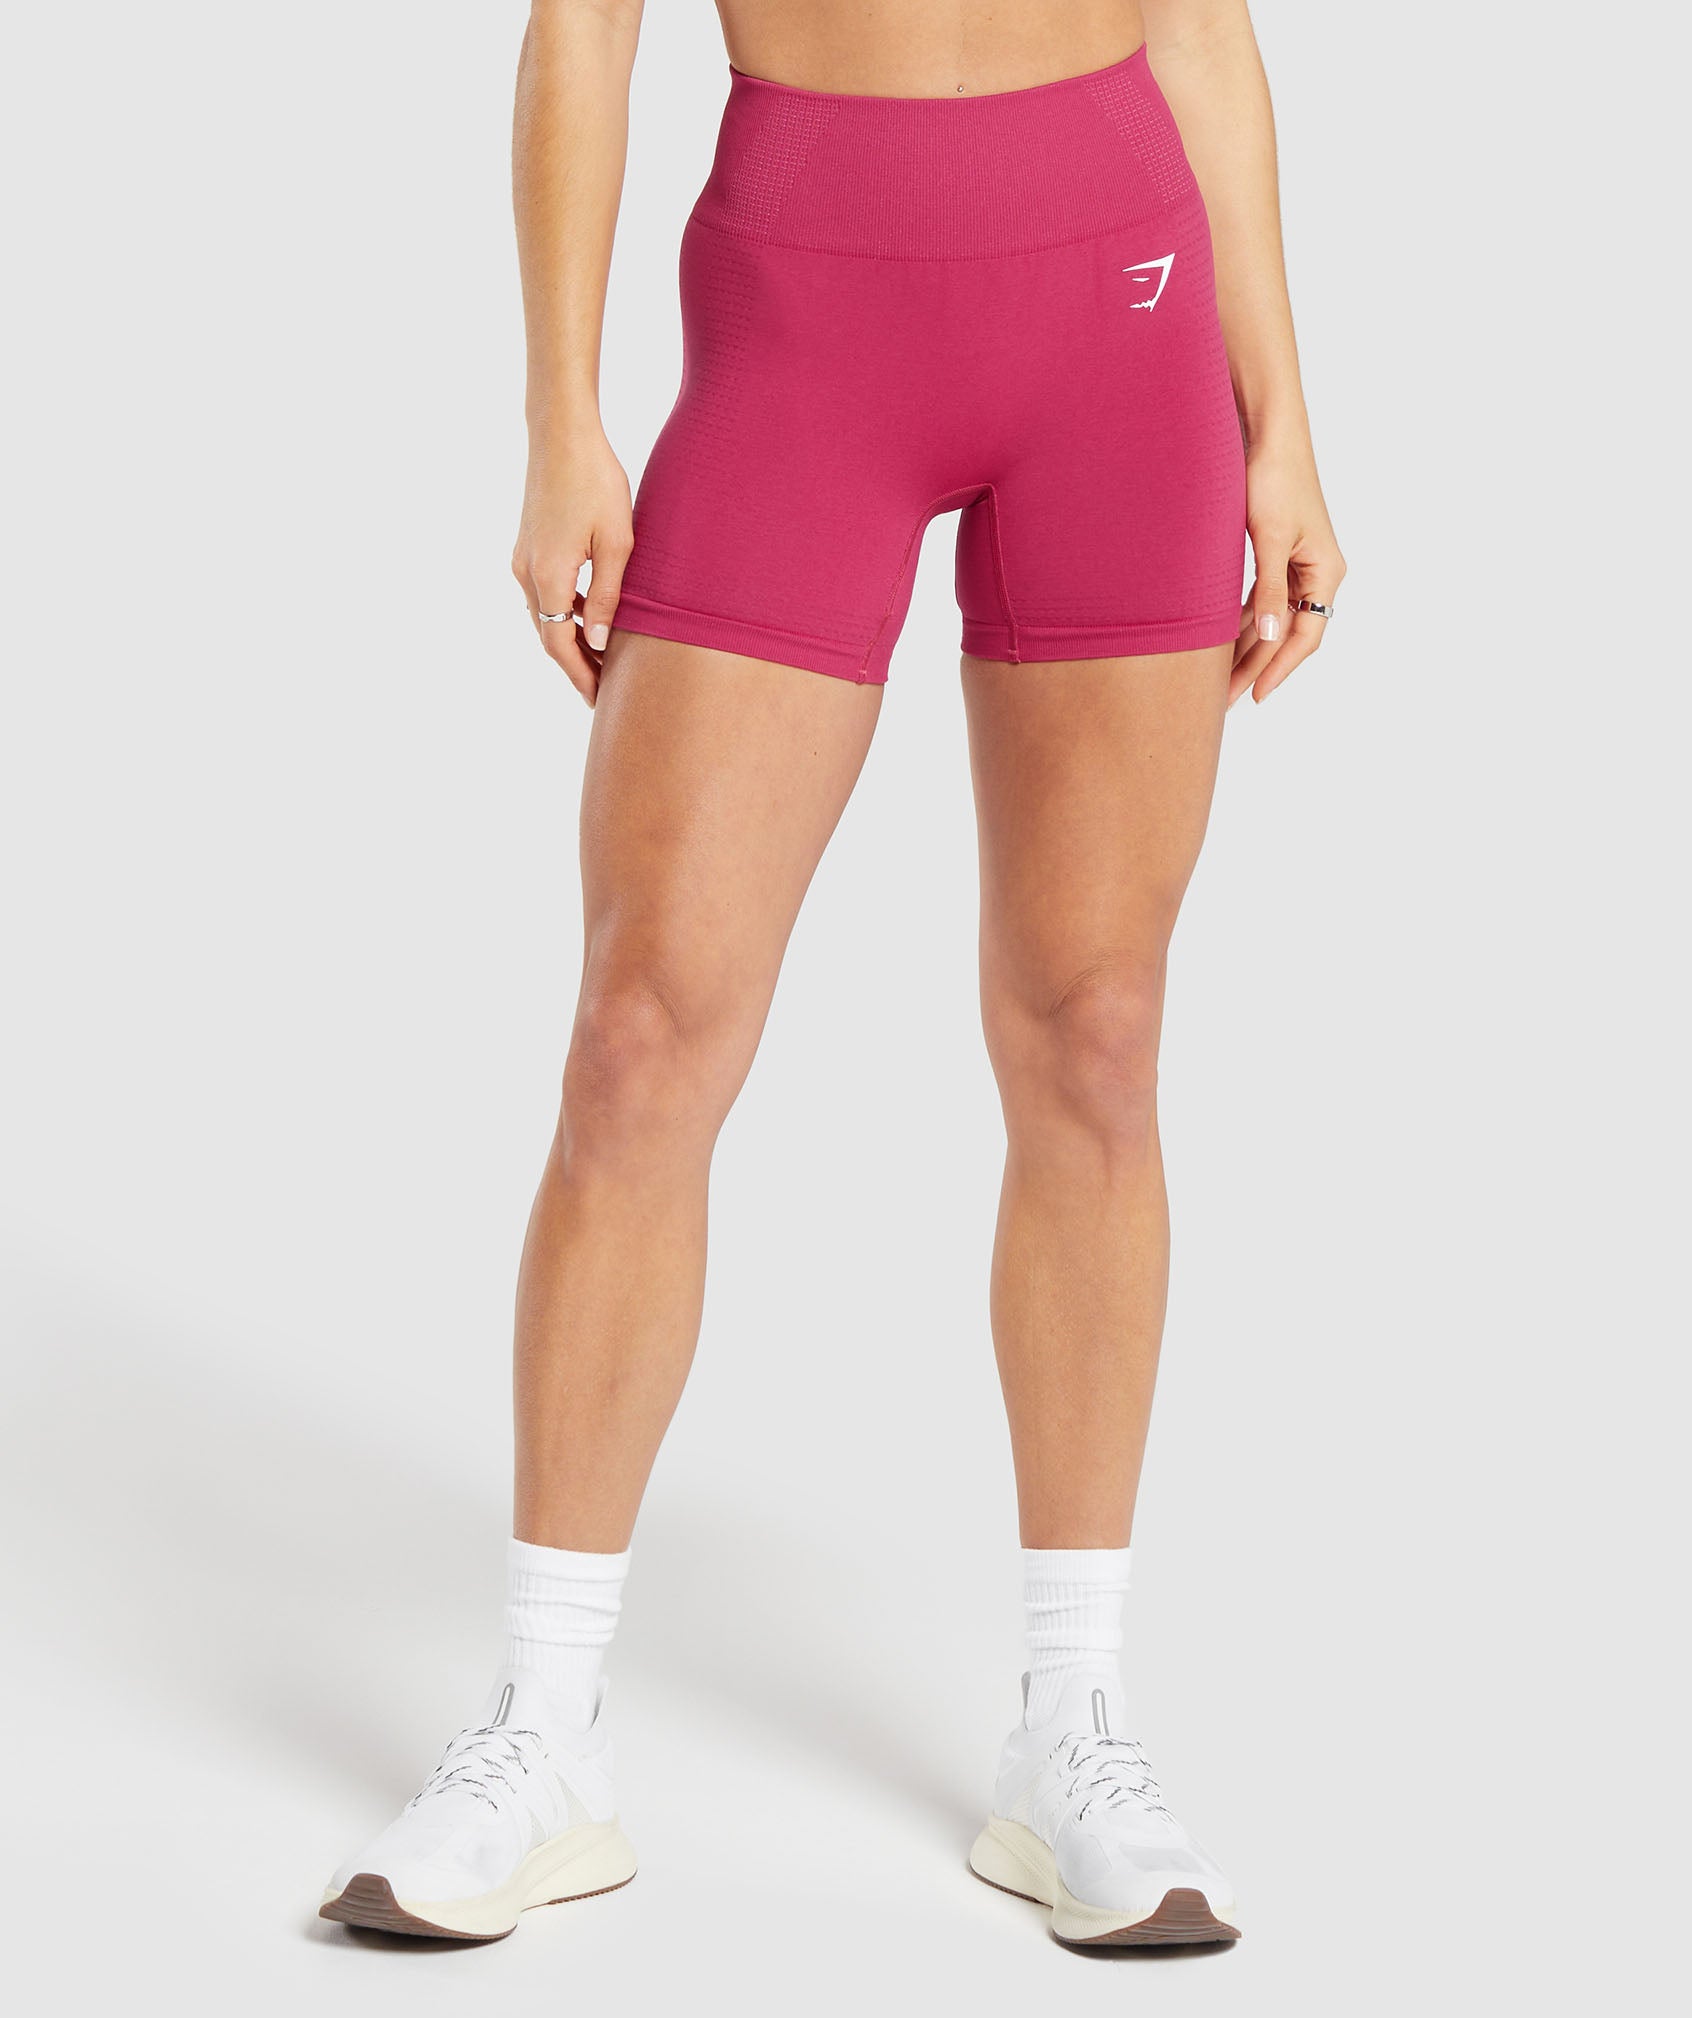 Vital Seamless 2.0 Shorts in Vintage Pink/Marl - view 1